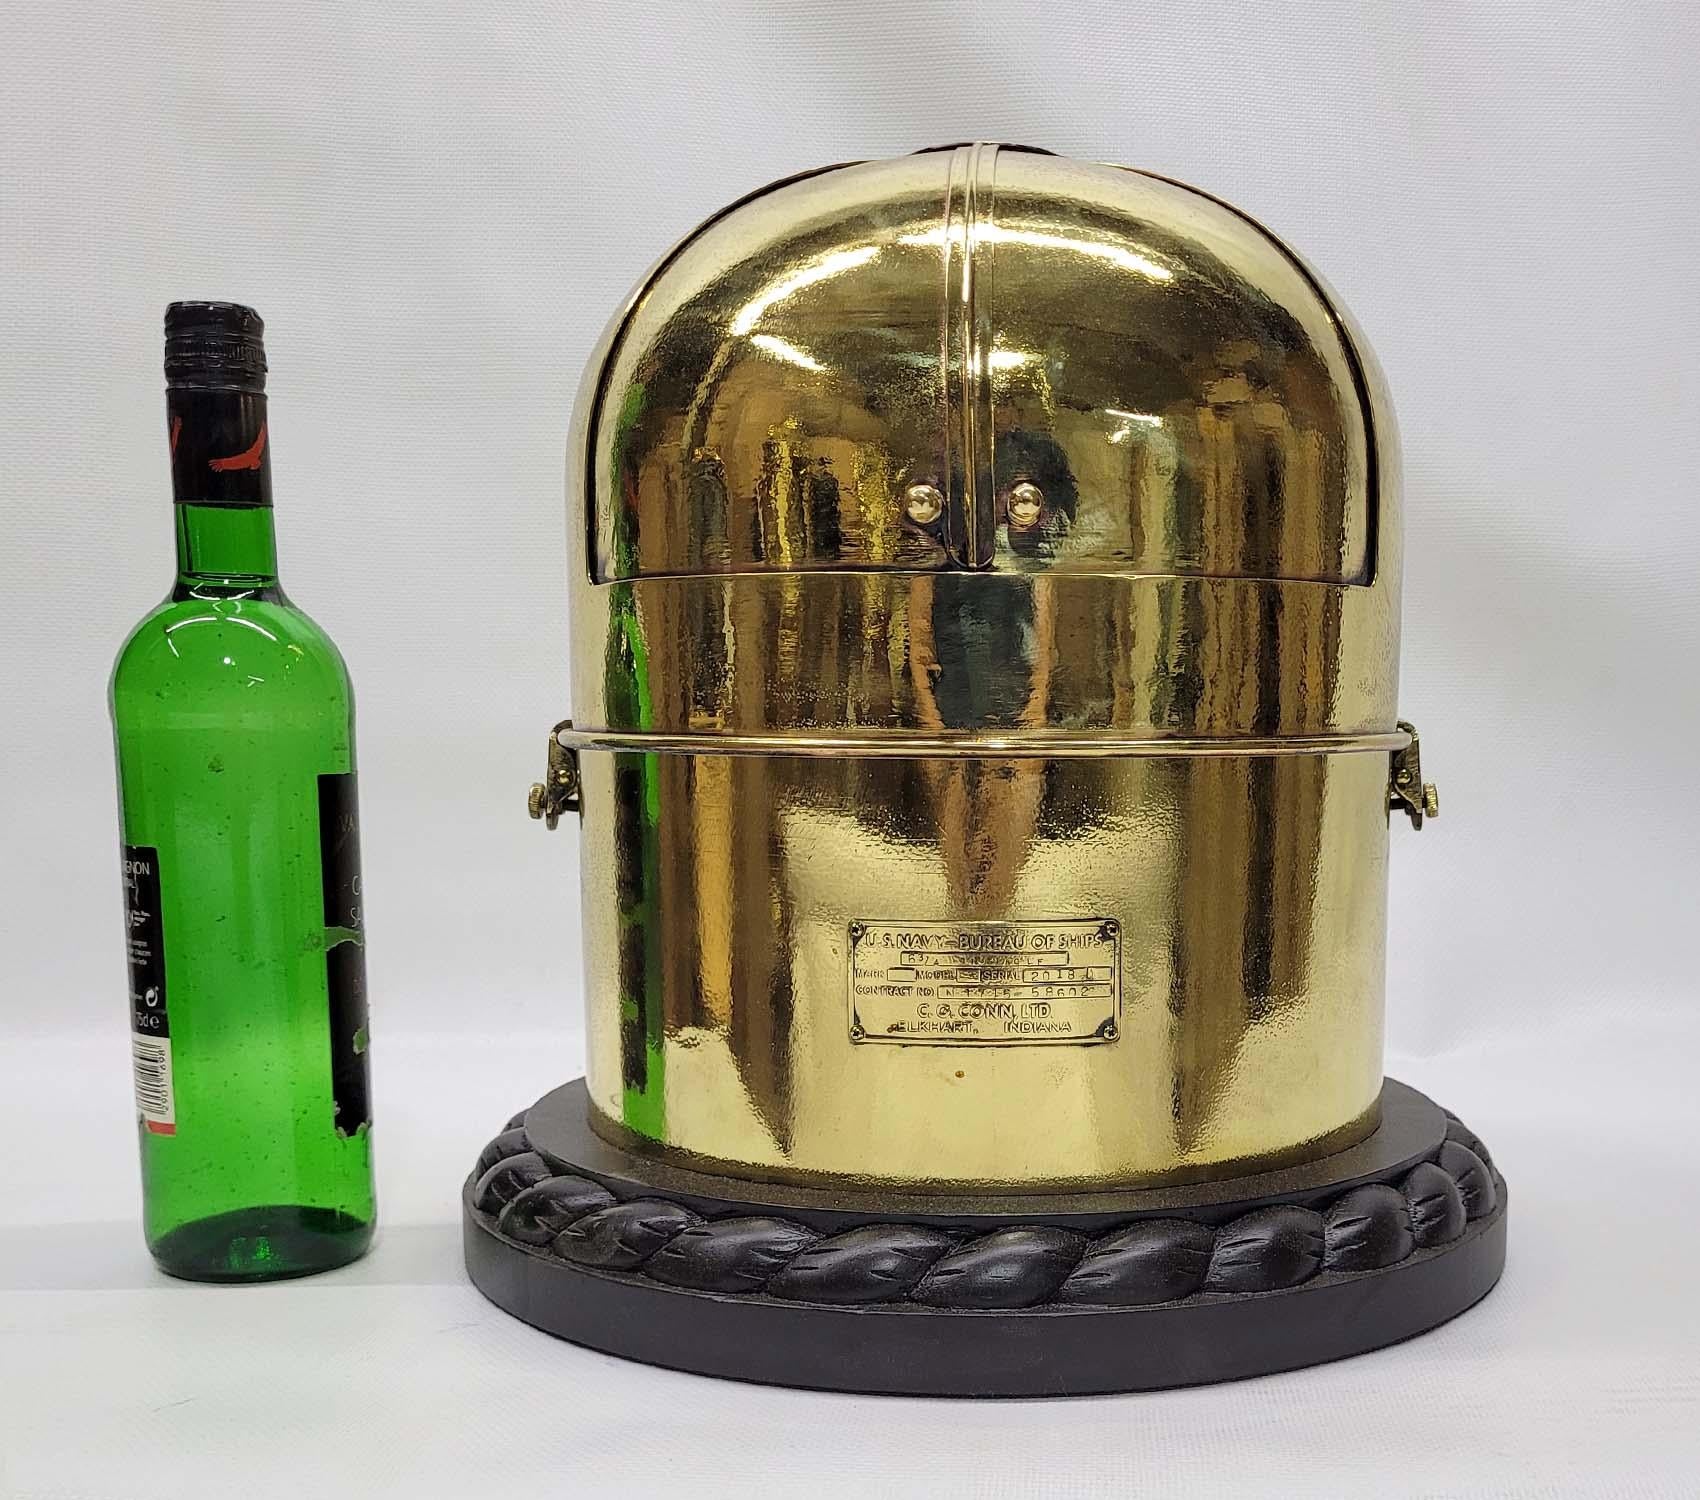 Solid Brass highly polished boat binnacle with makers plate which reads “US Navy Bureau of Ships, C.G. Conn, LTD Elkhart Indiana. Fitted with a compass from John Bliss of New York. 

Weight: 30 lbs
Overall Dimensions: 14